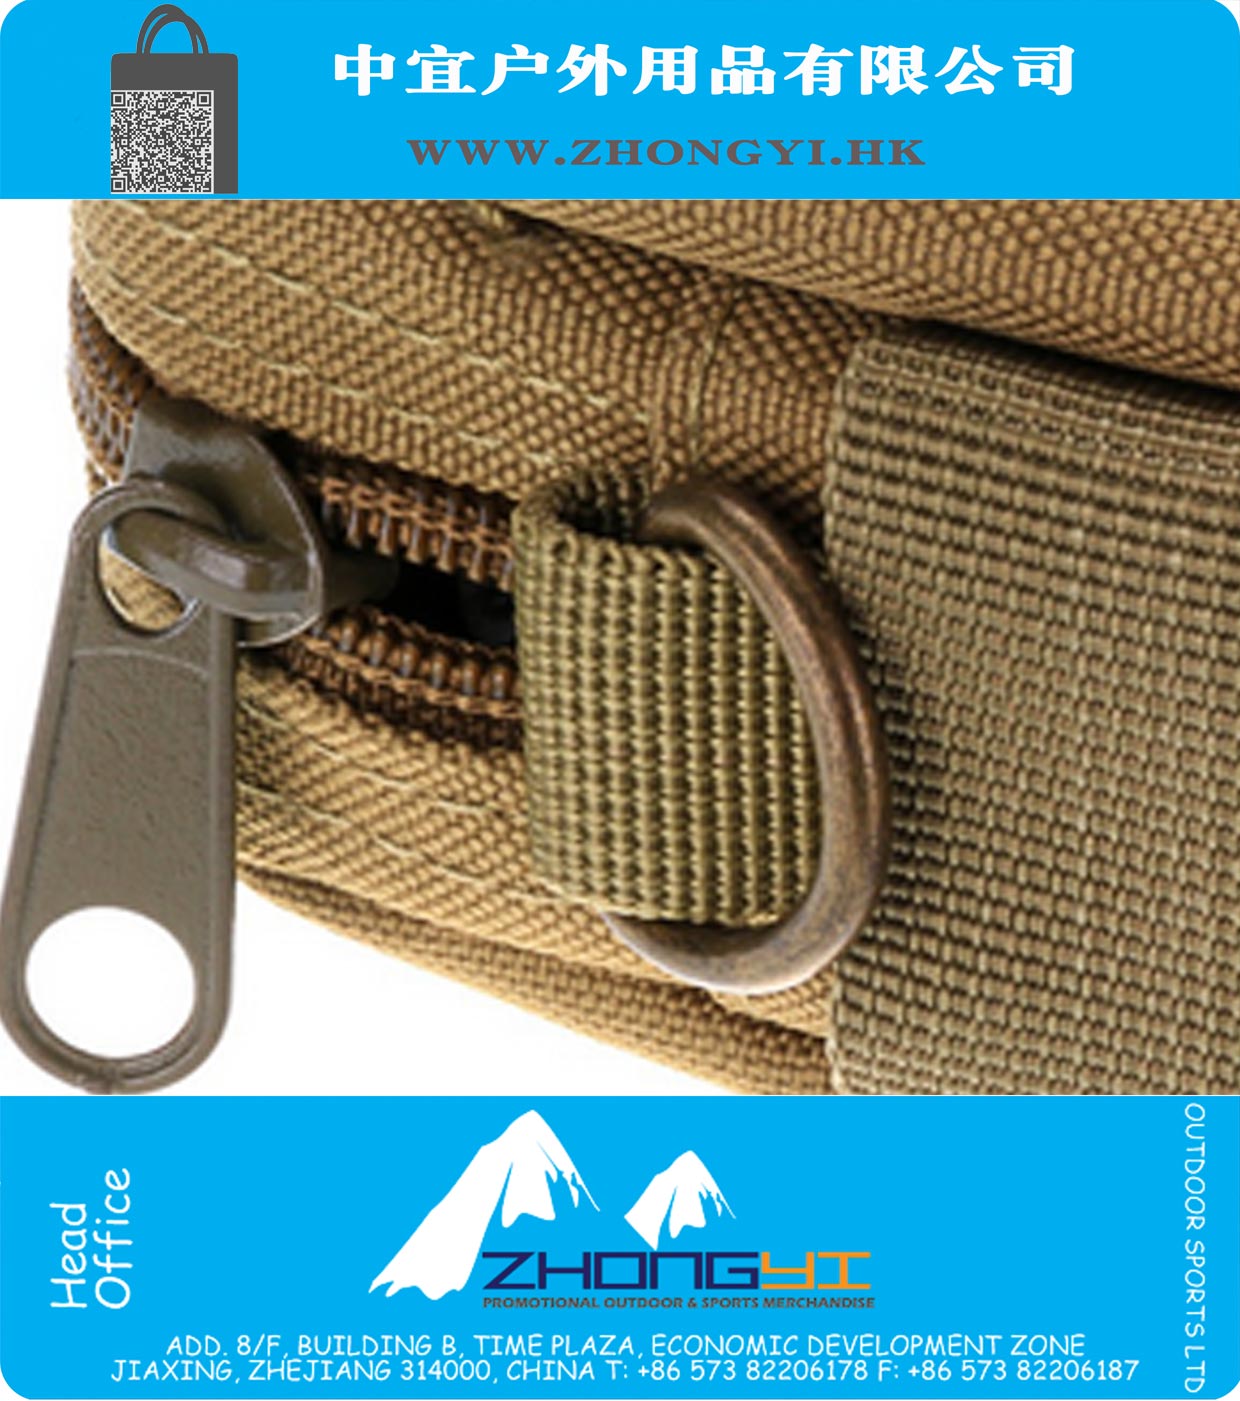 Hiking Jogging Running Outdoor Pouch